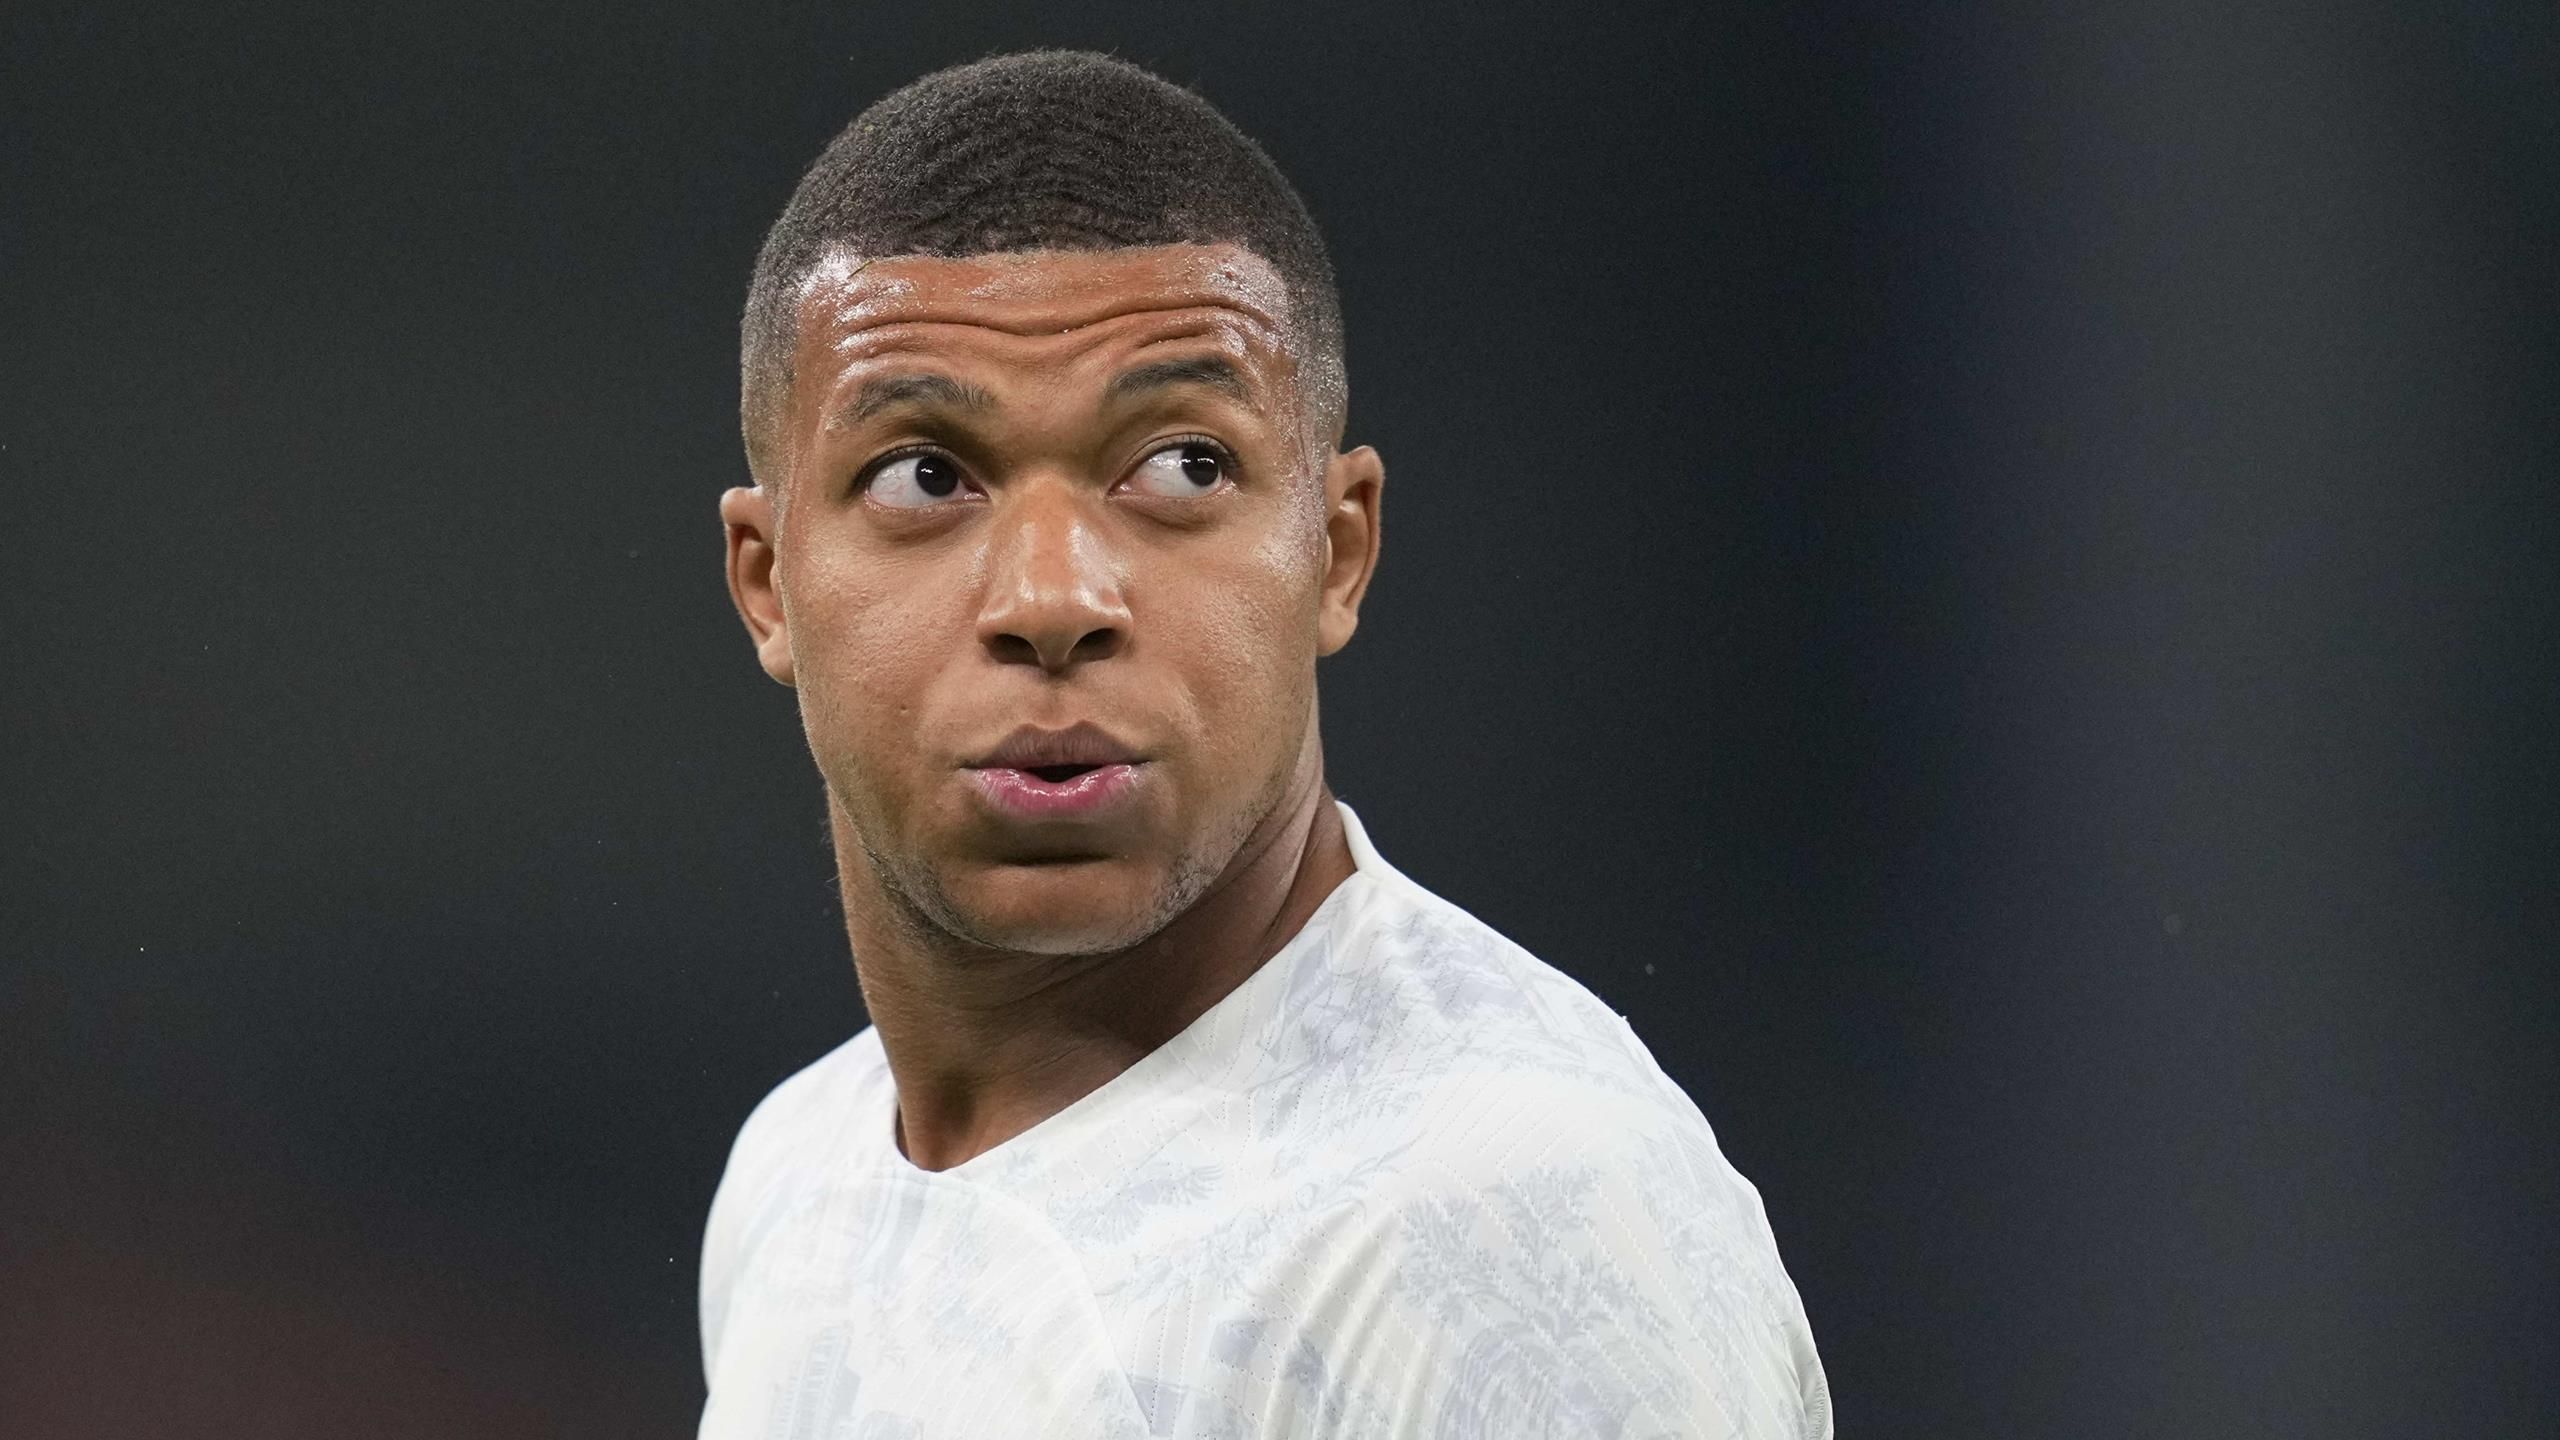 Kylian Mbappe tops Forbes' football rich list for first time, above